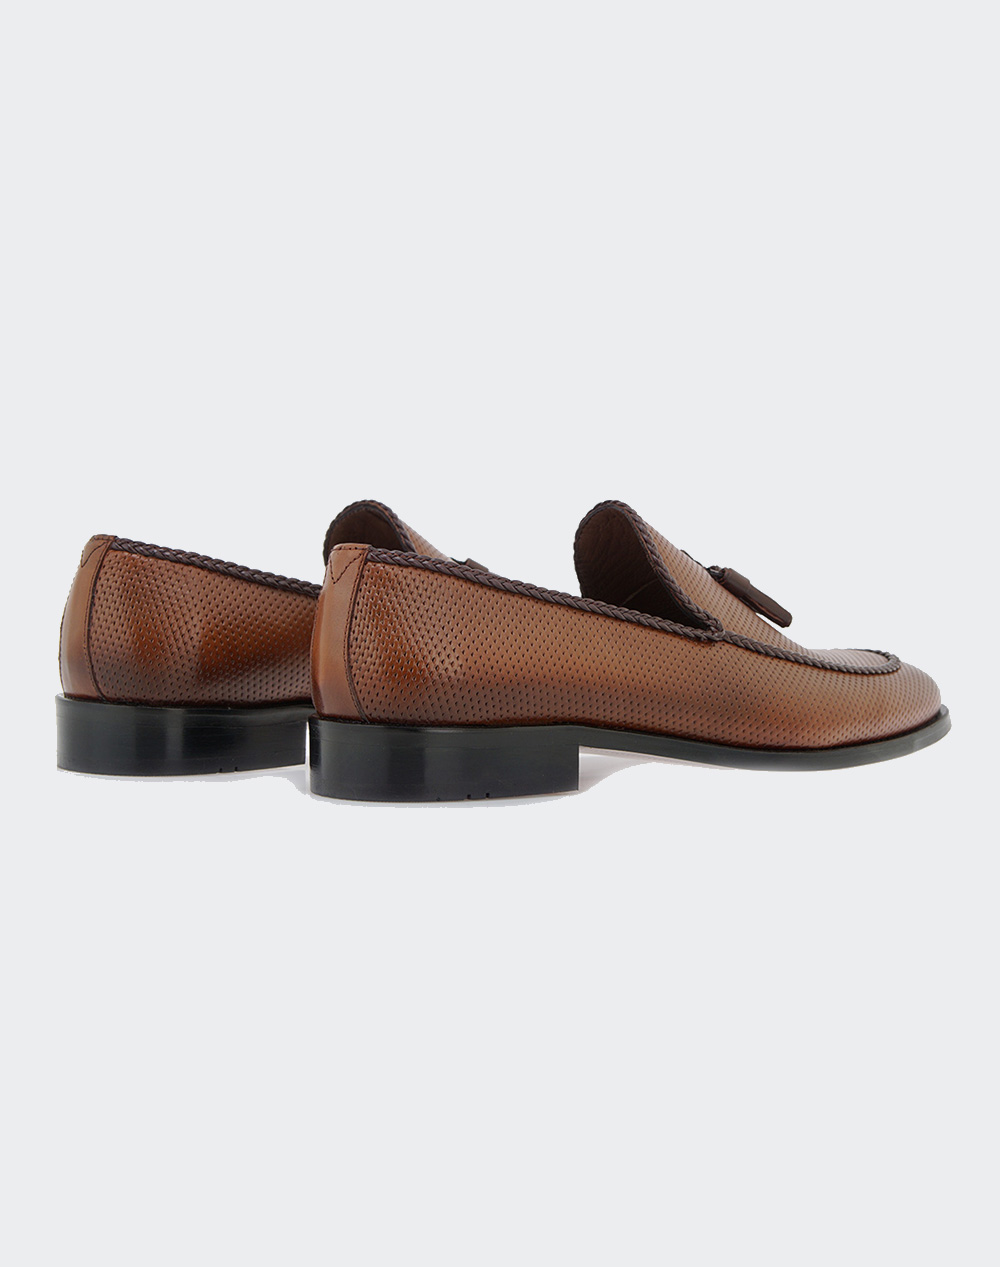 LORENZO RUSSO LOAFERS